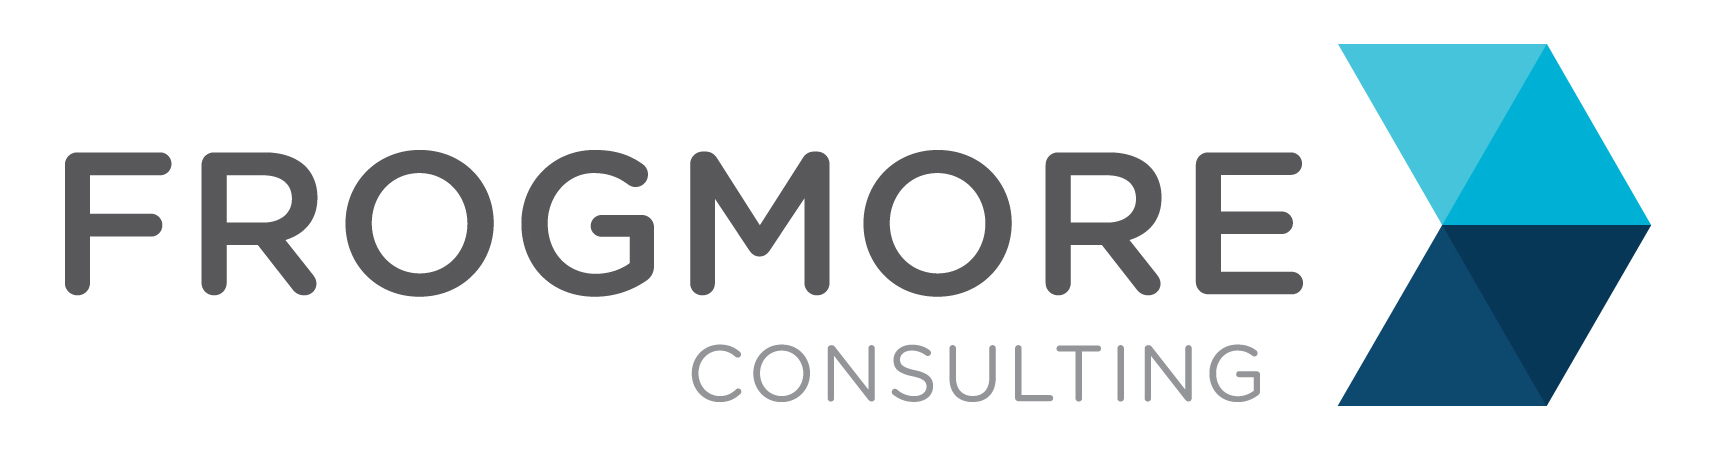 Frogmore Consulting Logo